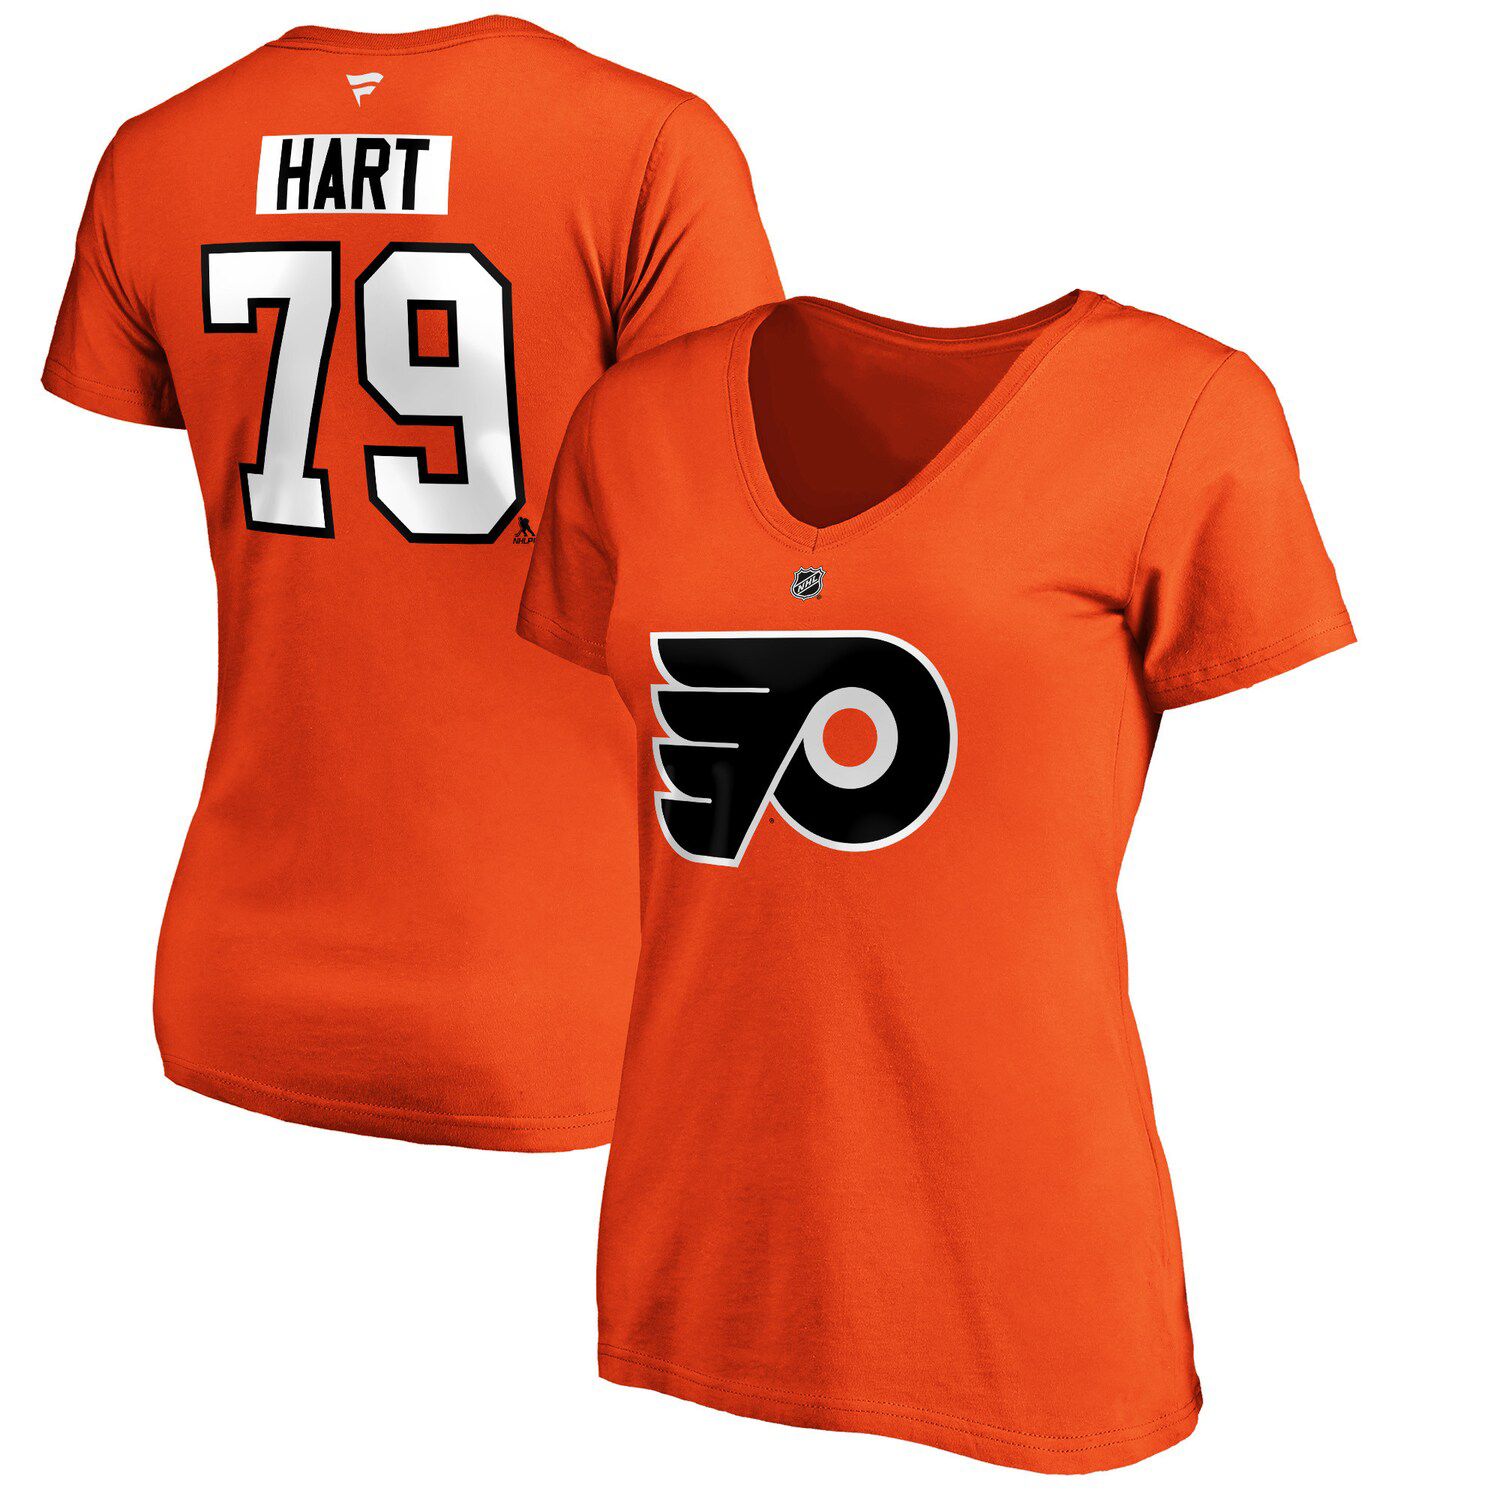 carter hart authentic jersey